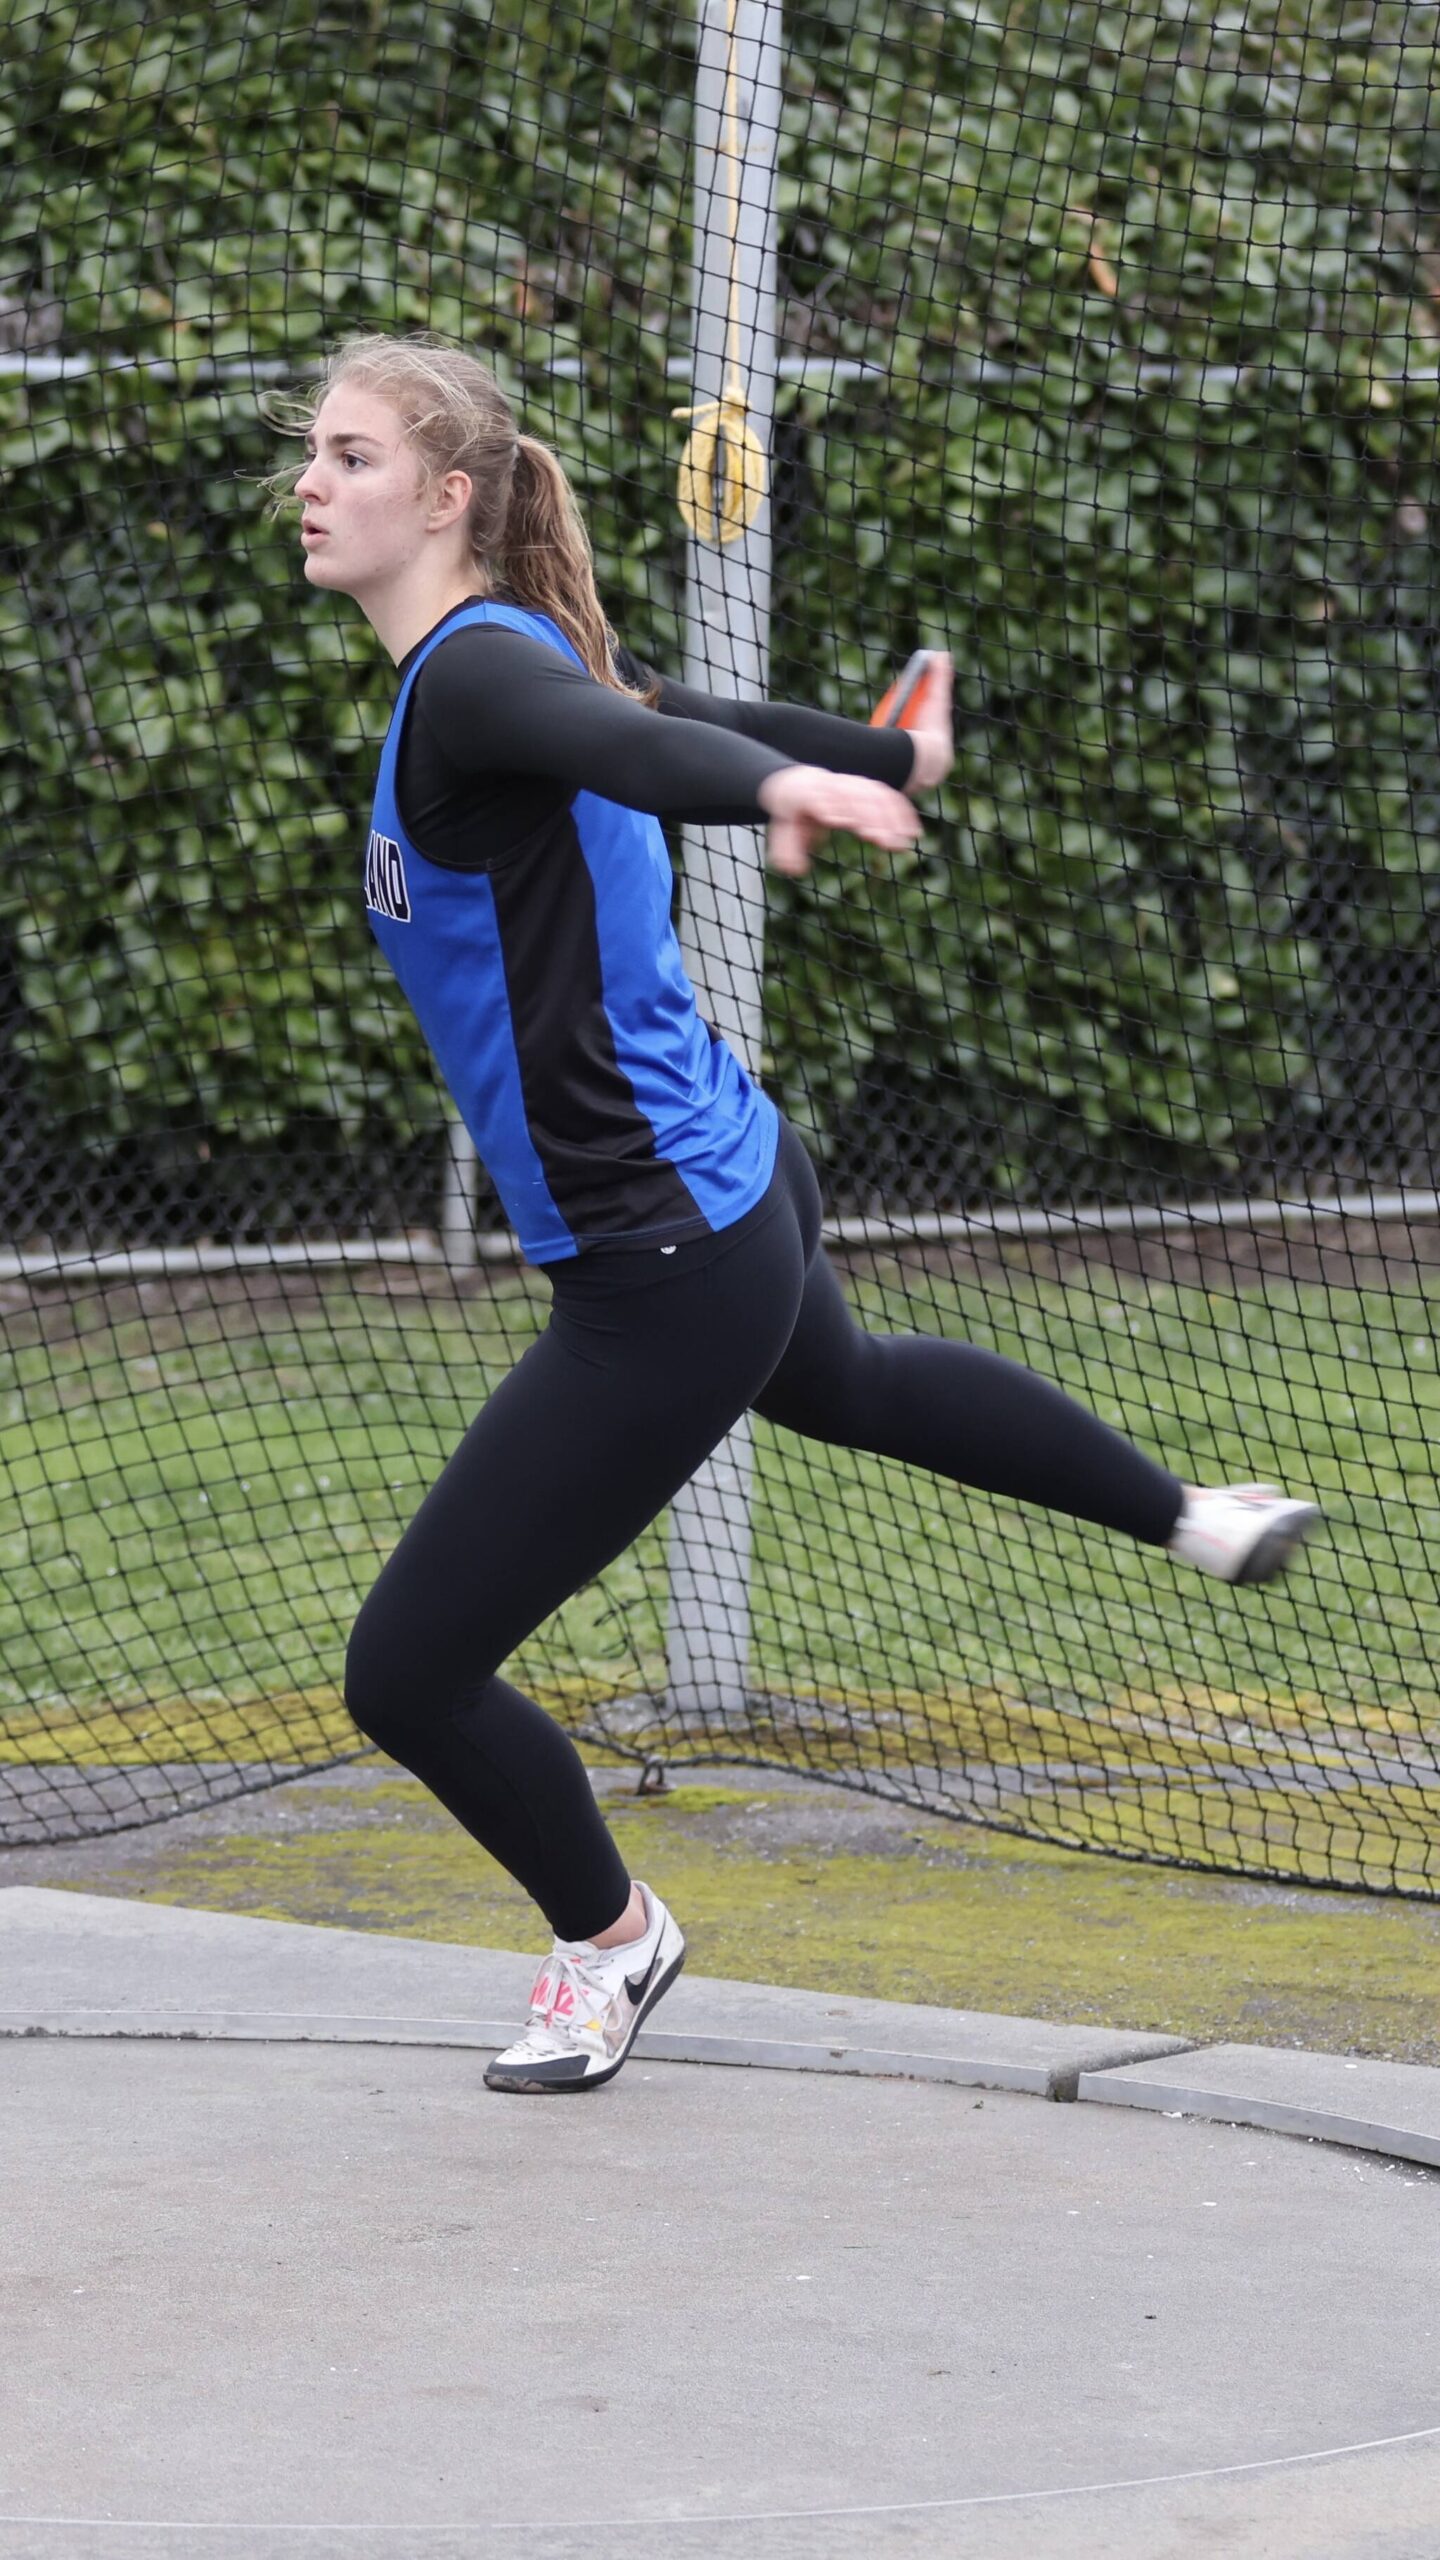 Alyson Stephens photo.
Bethany Carter continues to shine as a discus thrower.